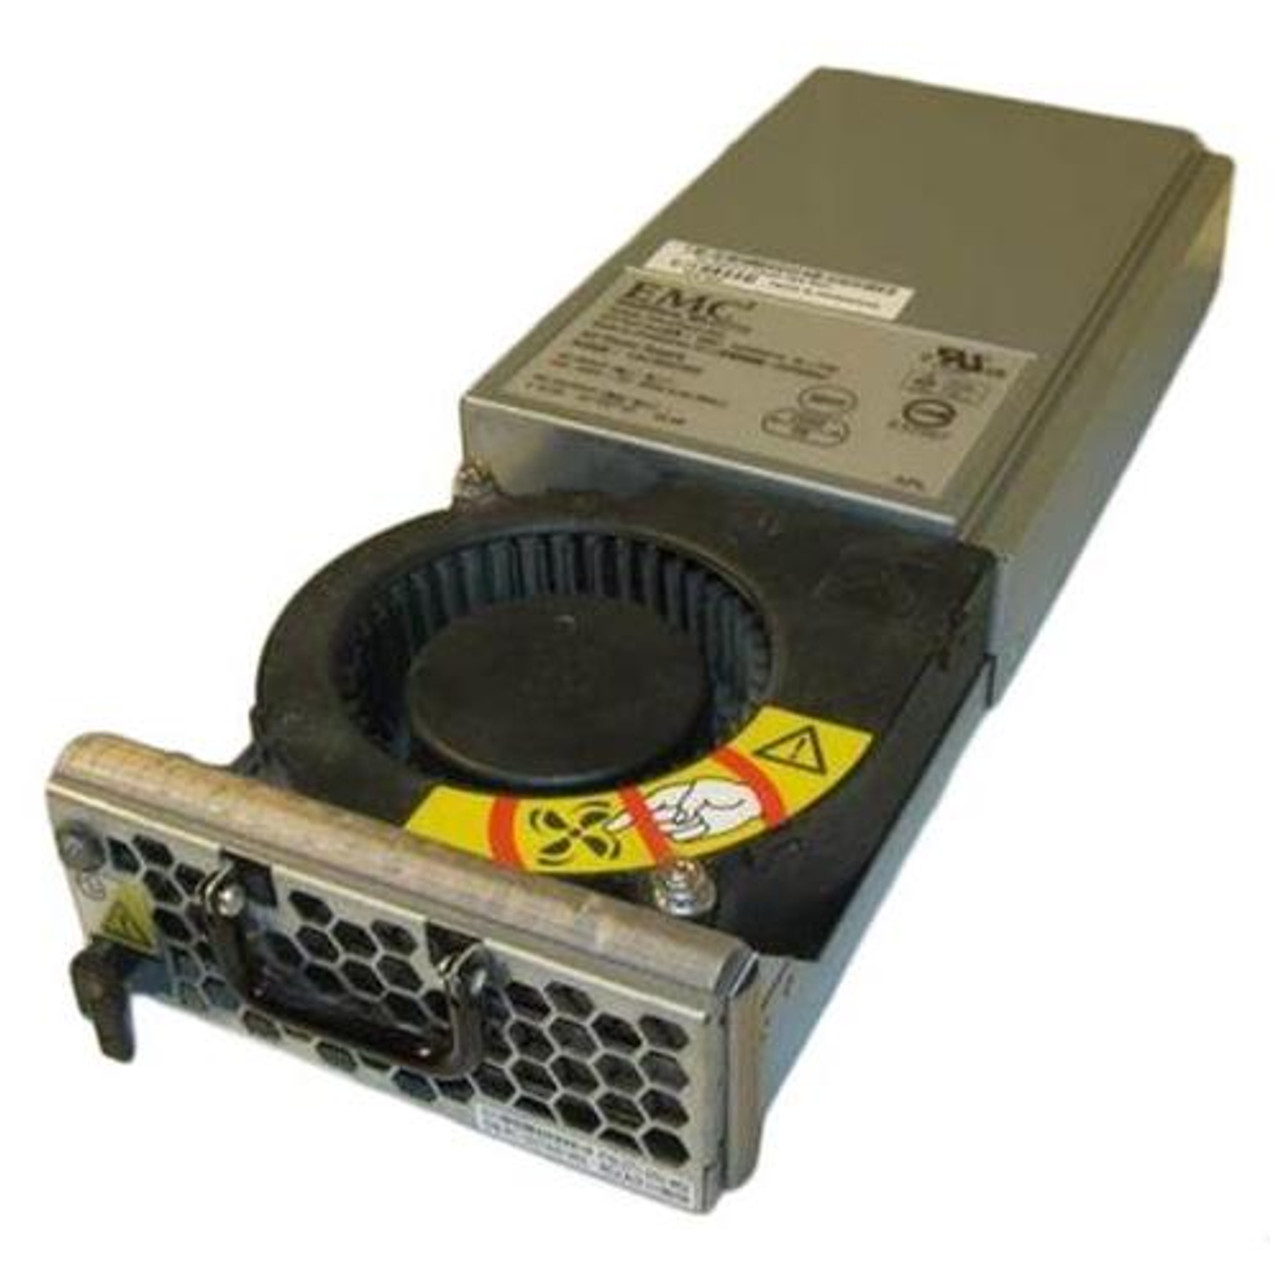 071-000-508 EMC Power Supply Blower Module for CX3-20 and CX3-40